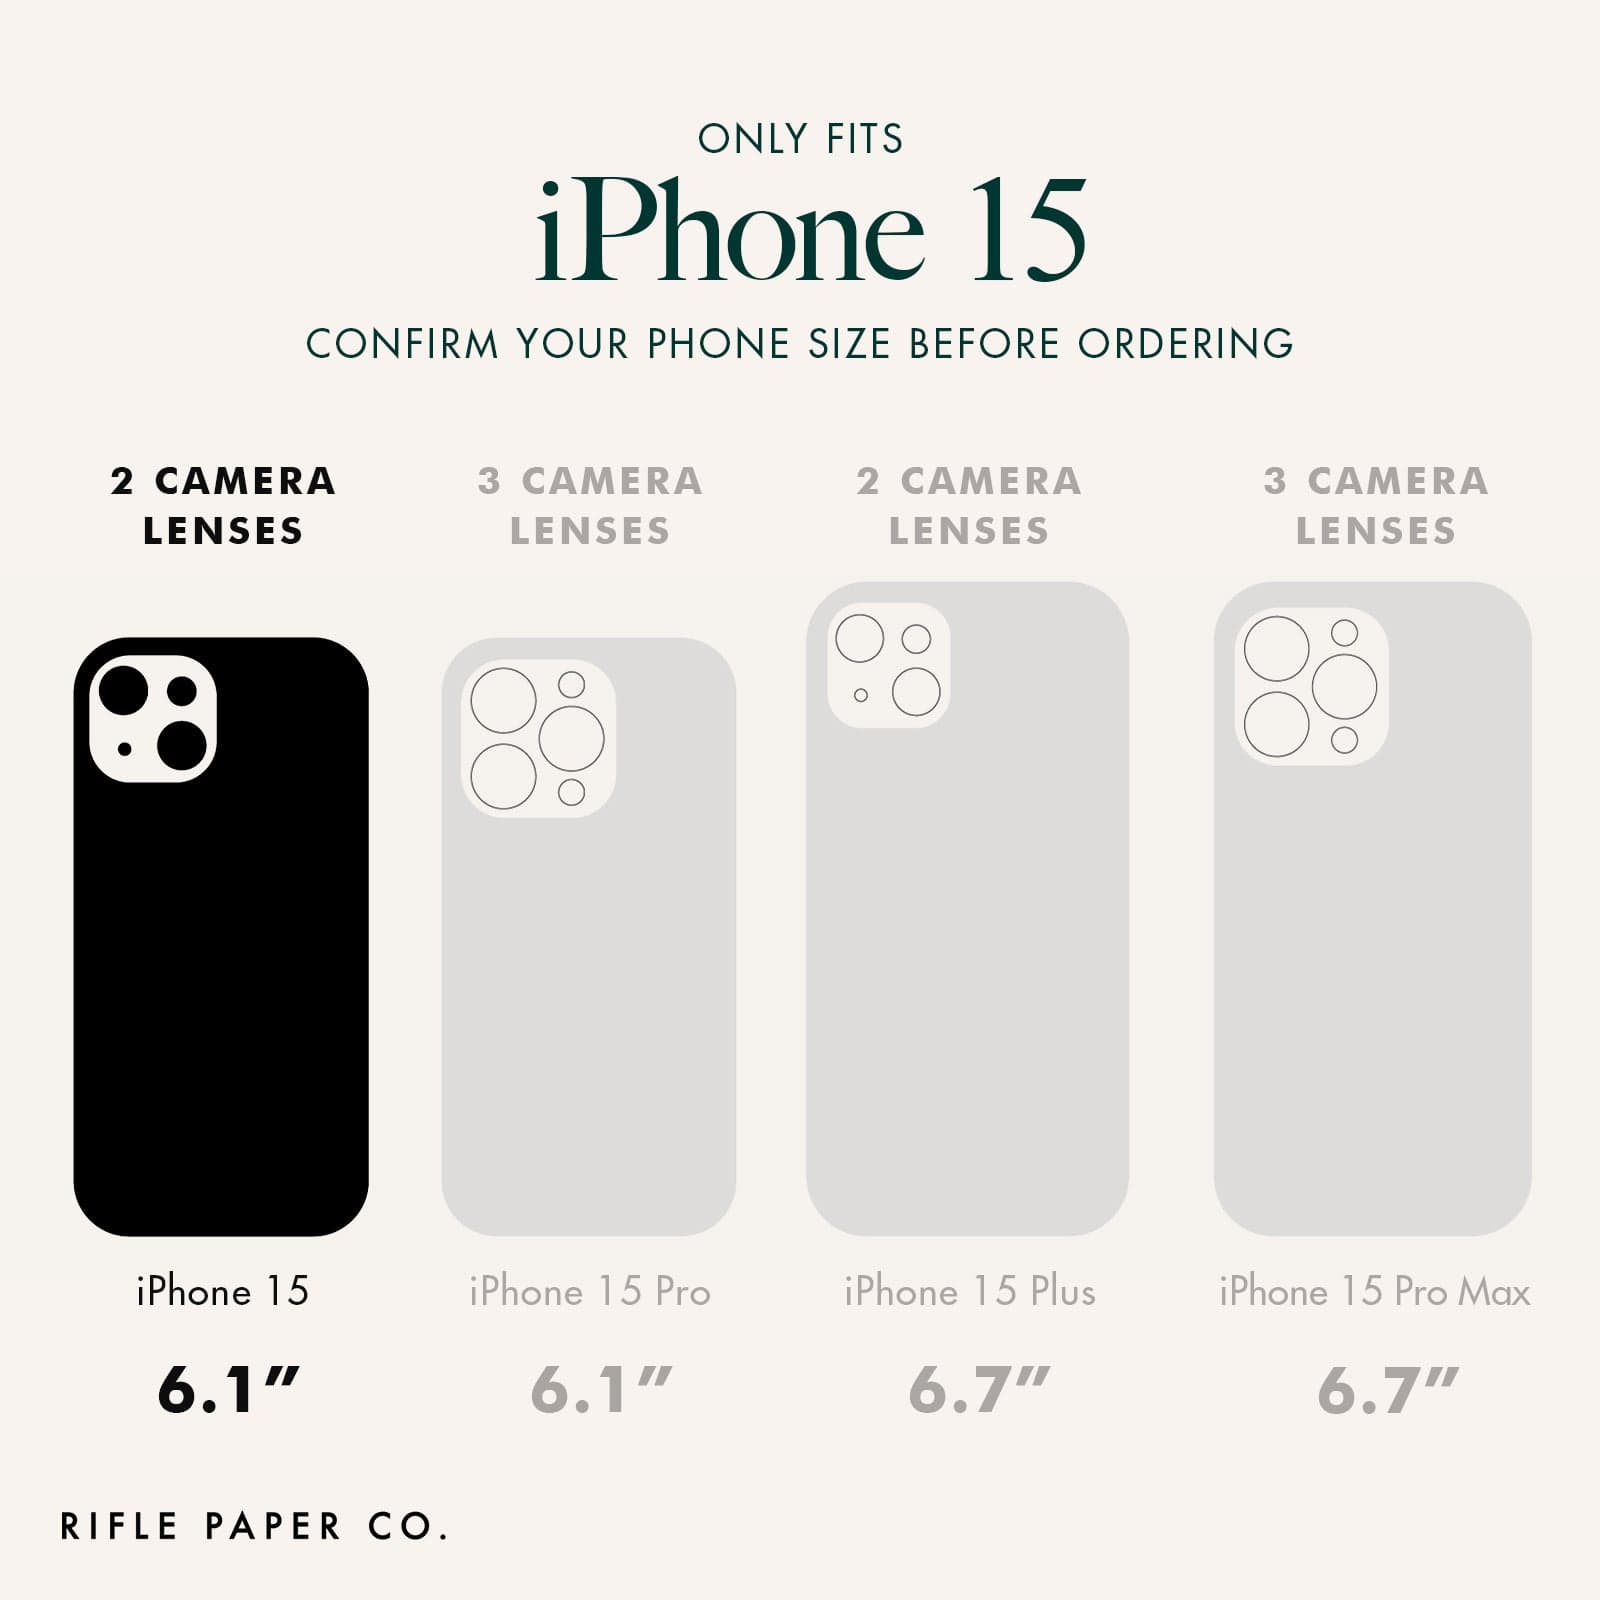 ONLY FITS IPHONE 15. CONFIRM YOUR PHONE SIZE BEFORE ORDERING.